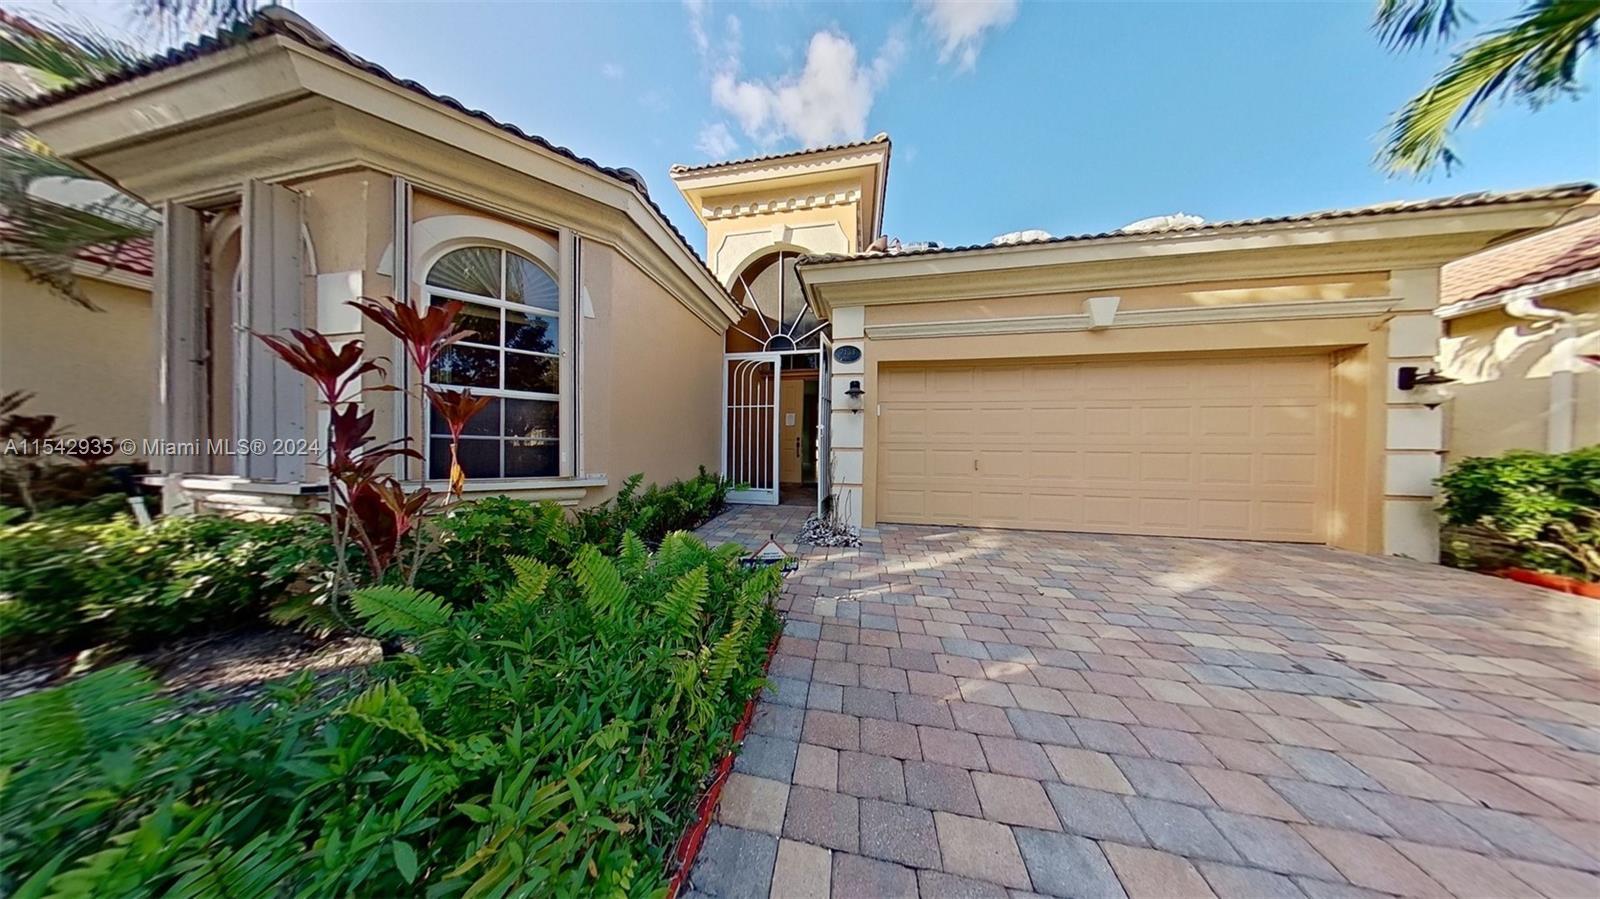 Spacious Home within the 55+ Gated Community of Mizner Falls featuring 3 beds, 2.5 baths, 2 cars gar